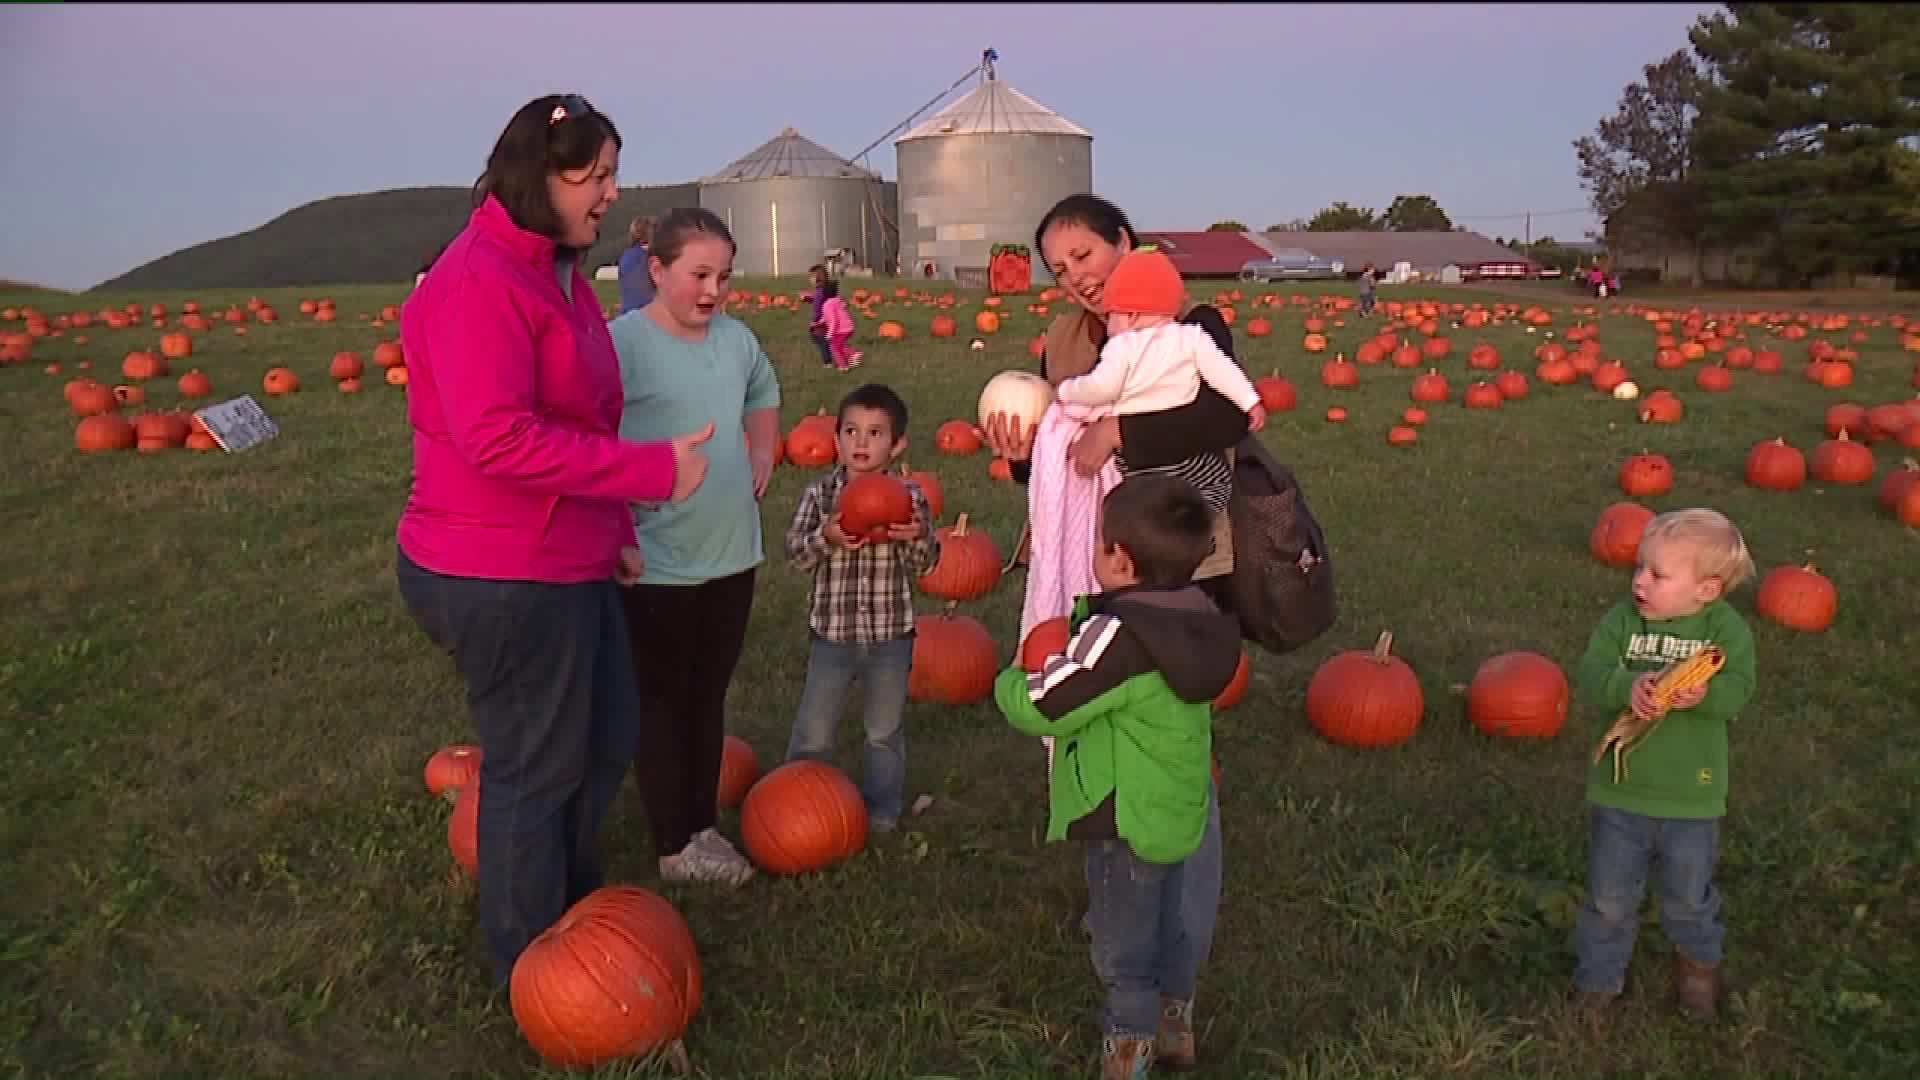 Special Needs Night out at Columbia County Farm